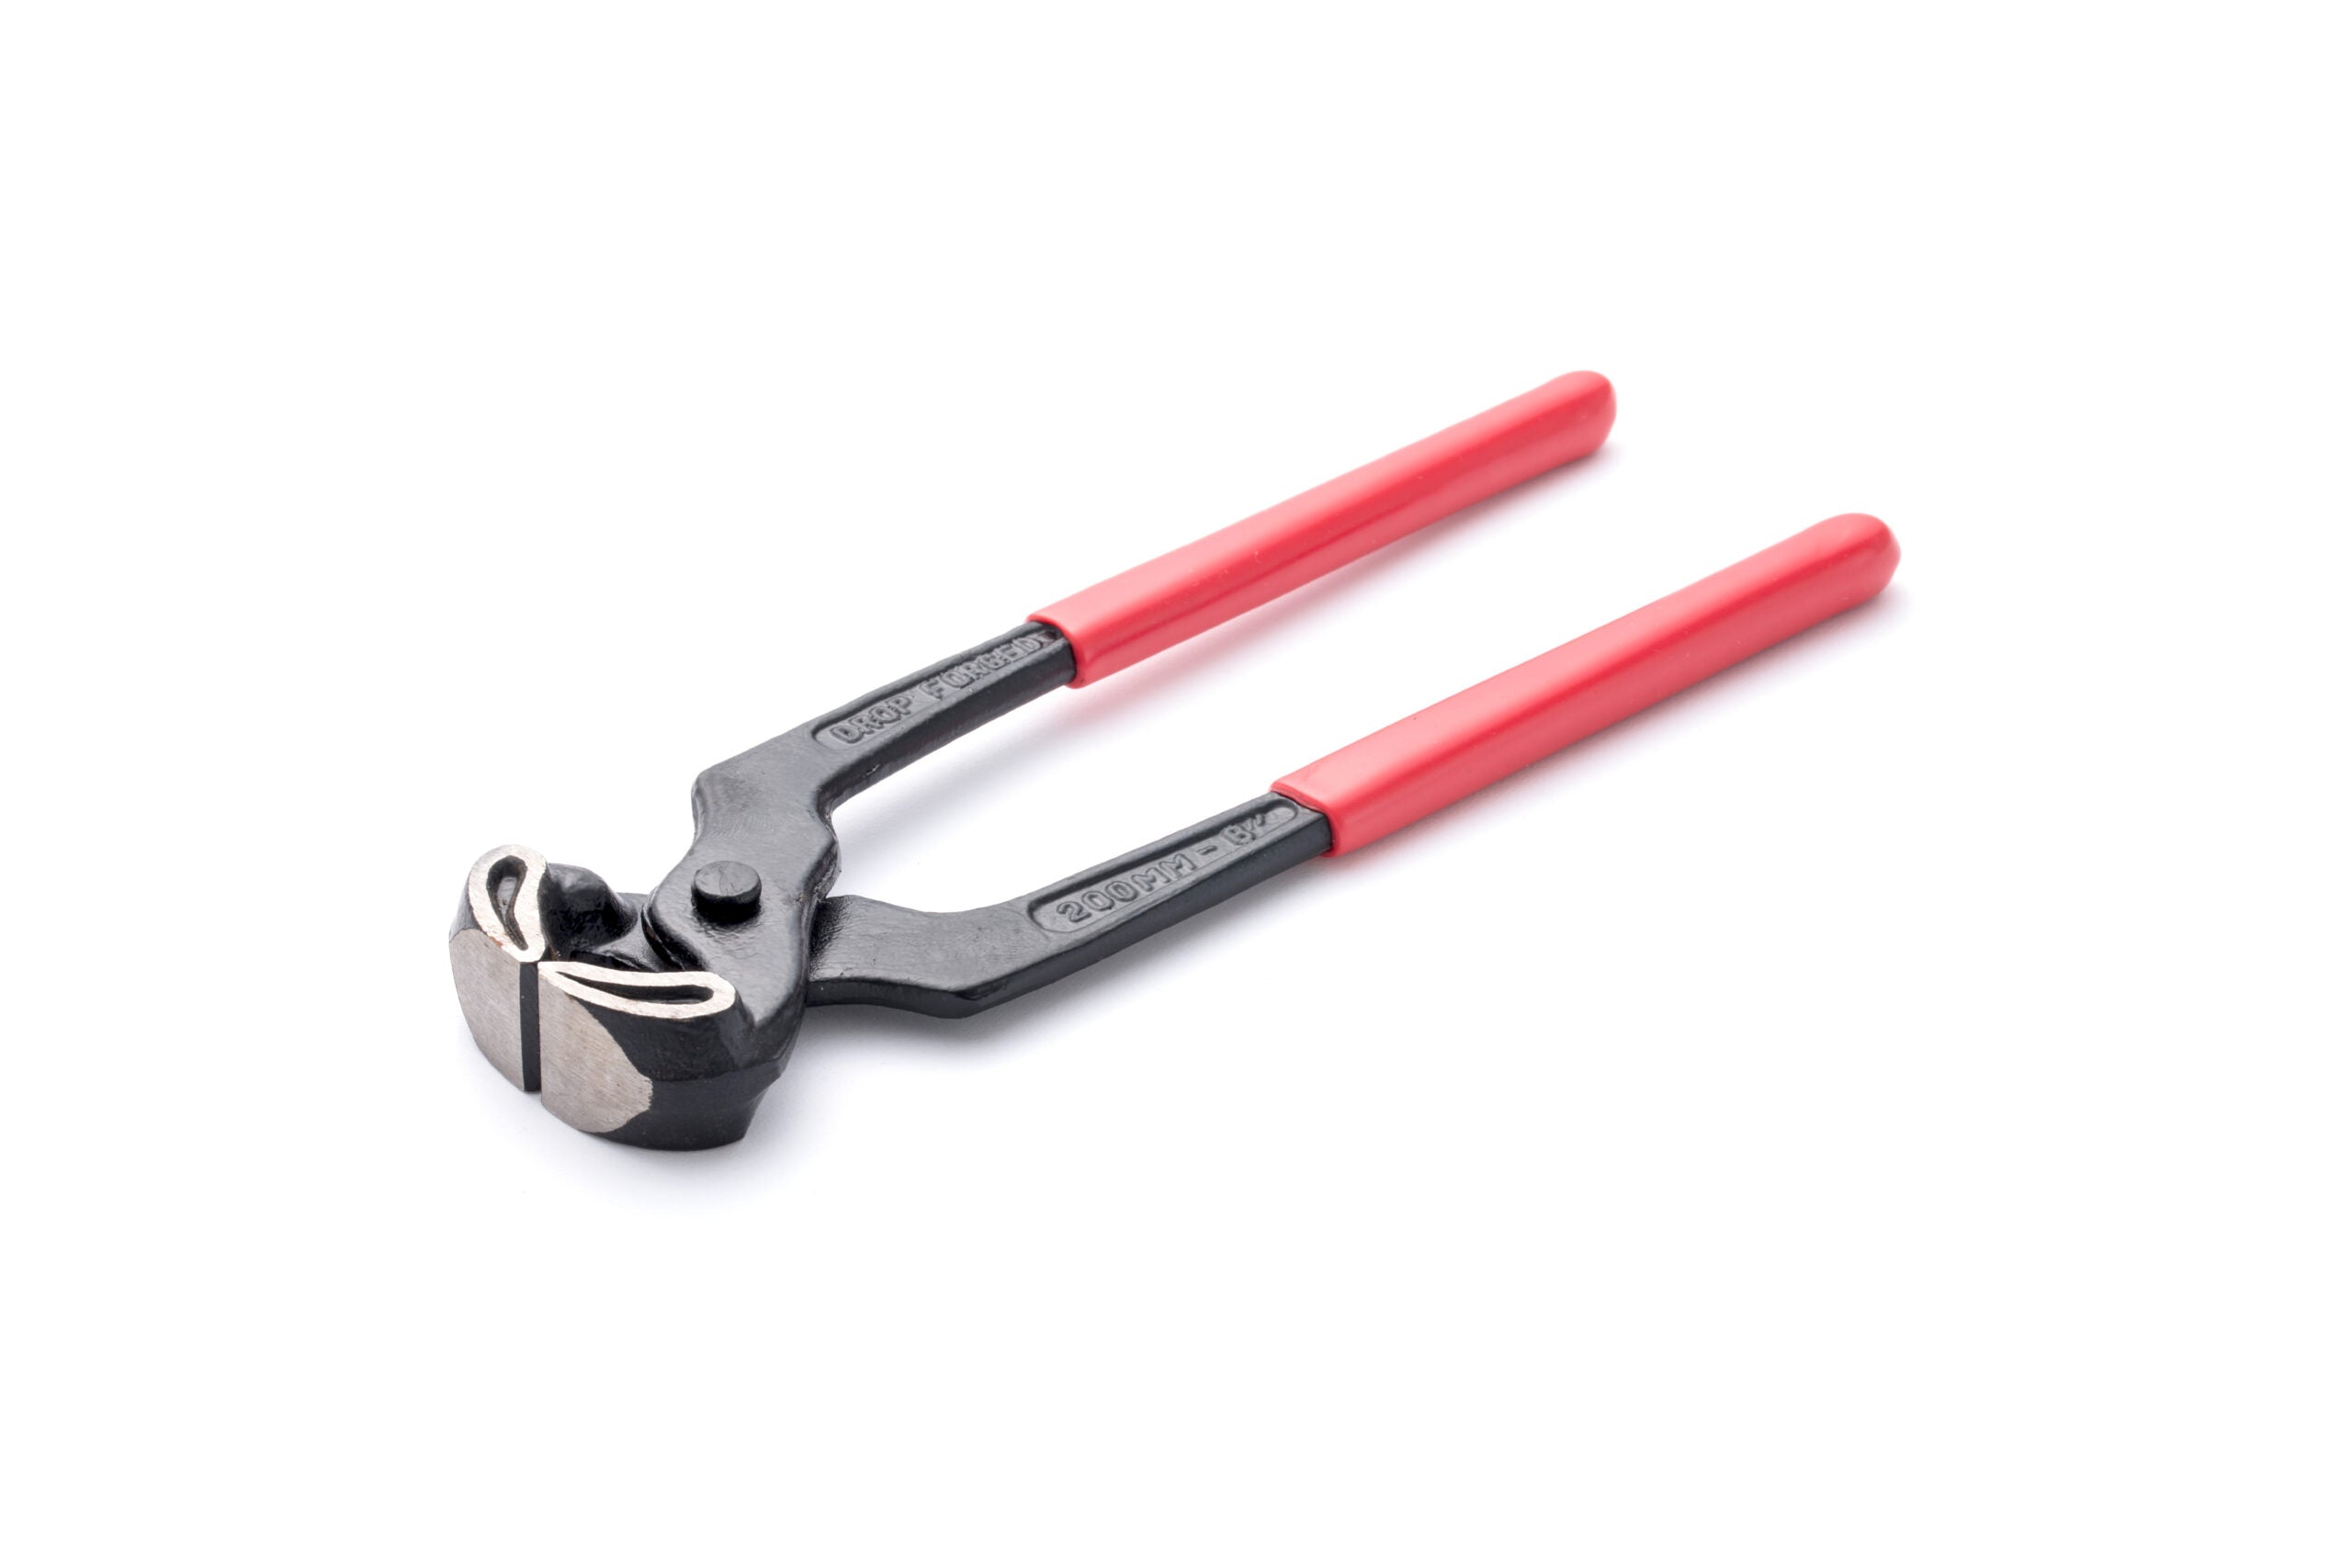 Planet Carpenters Pincers 8" Heavy Duty